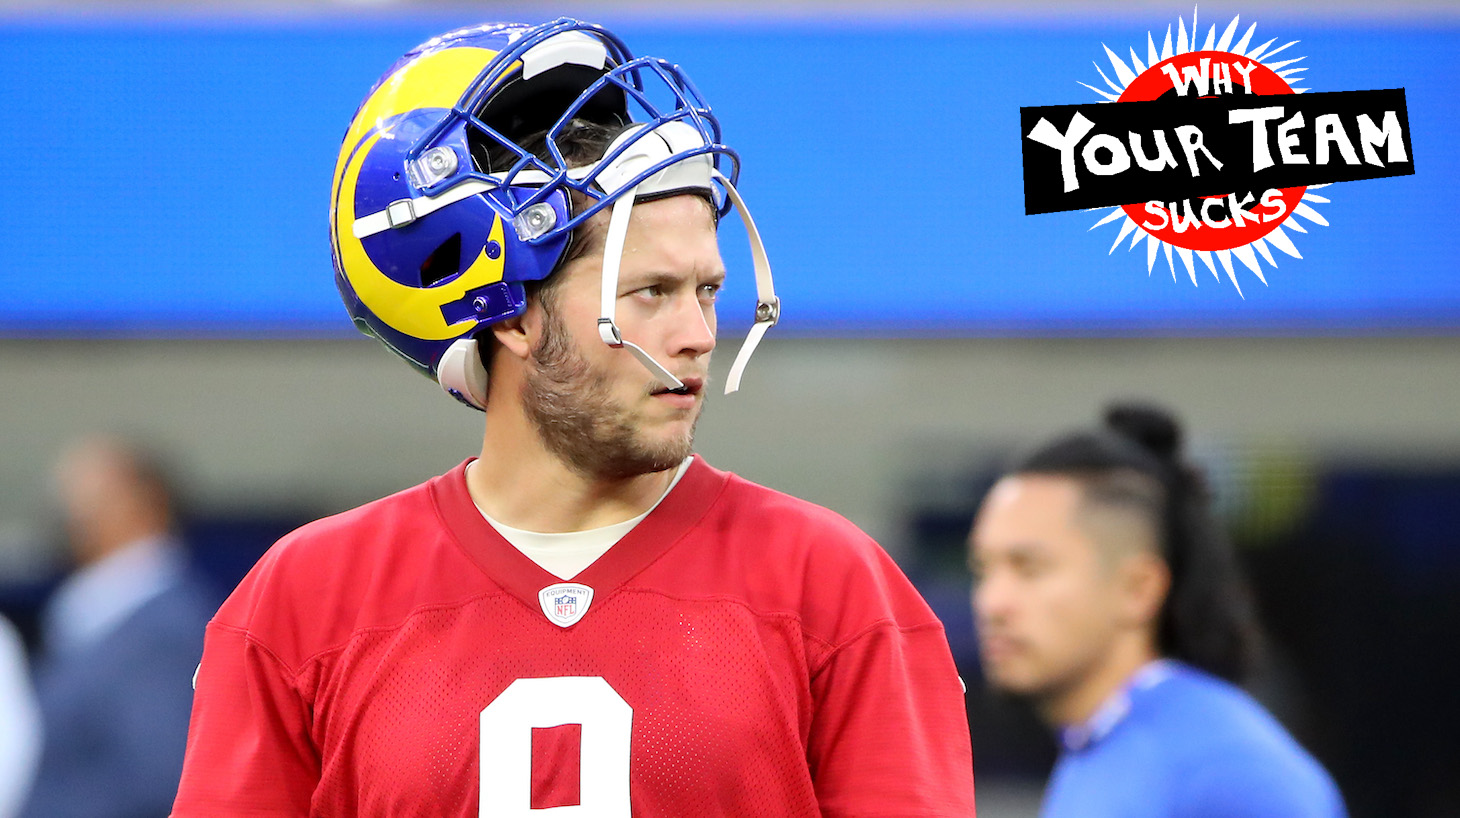 INGLEWOOD, CALIFORNIA - JUNE 10: Matthew Stafford #9 of the Los Angeles Rams looks on during open practice at SoFi Stadium on June 10, 2021 in Inglewood, California. (Photo by Katelyn Mulcahy/Getty Images)